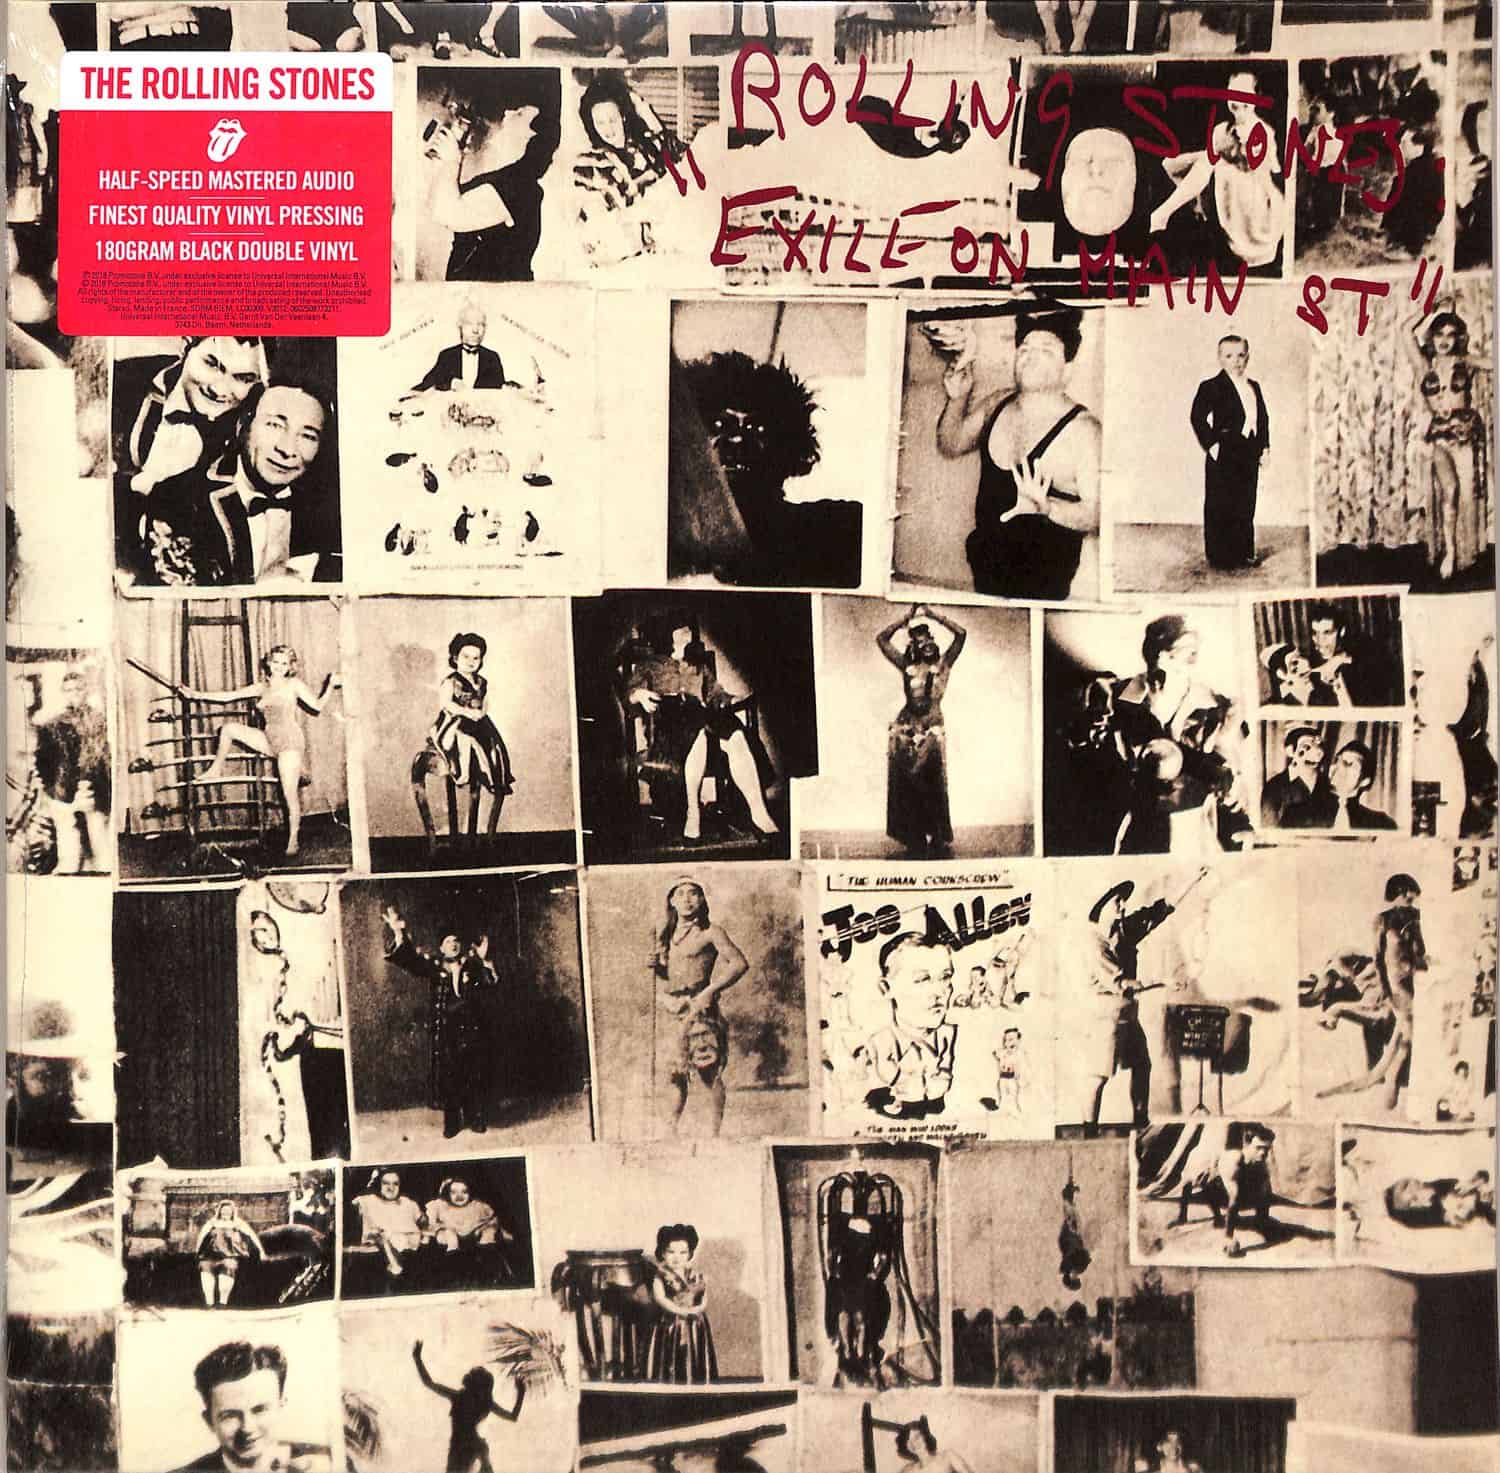 The Rolling Stones - EXILE ON MAIN STREET 